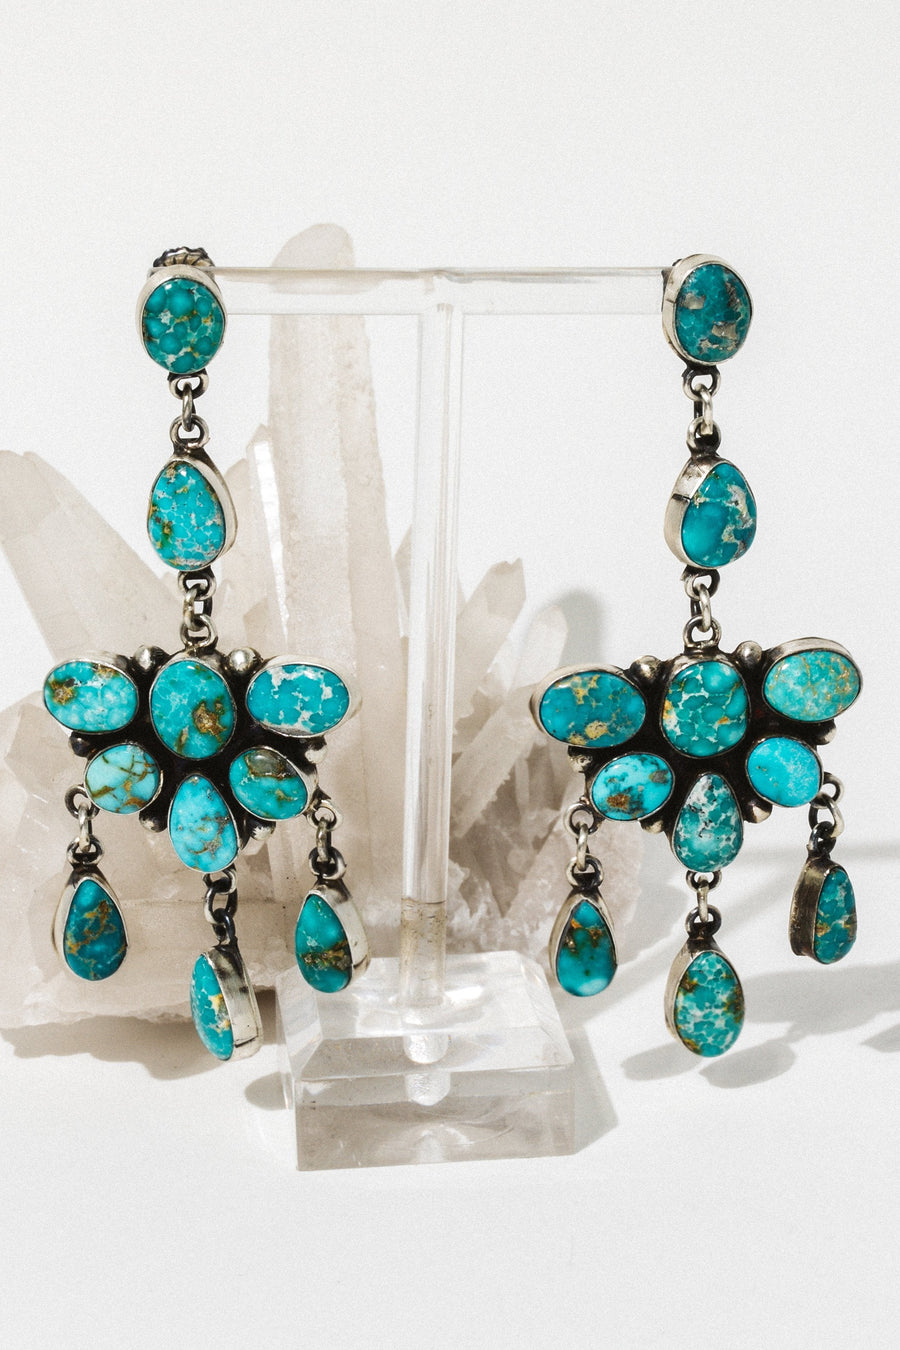 Sunwest Jewerly Silver / Turquoise Viho Statement Turquoise Earrings